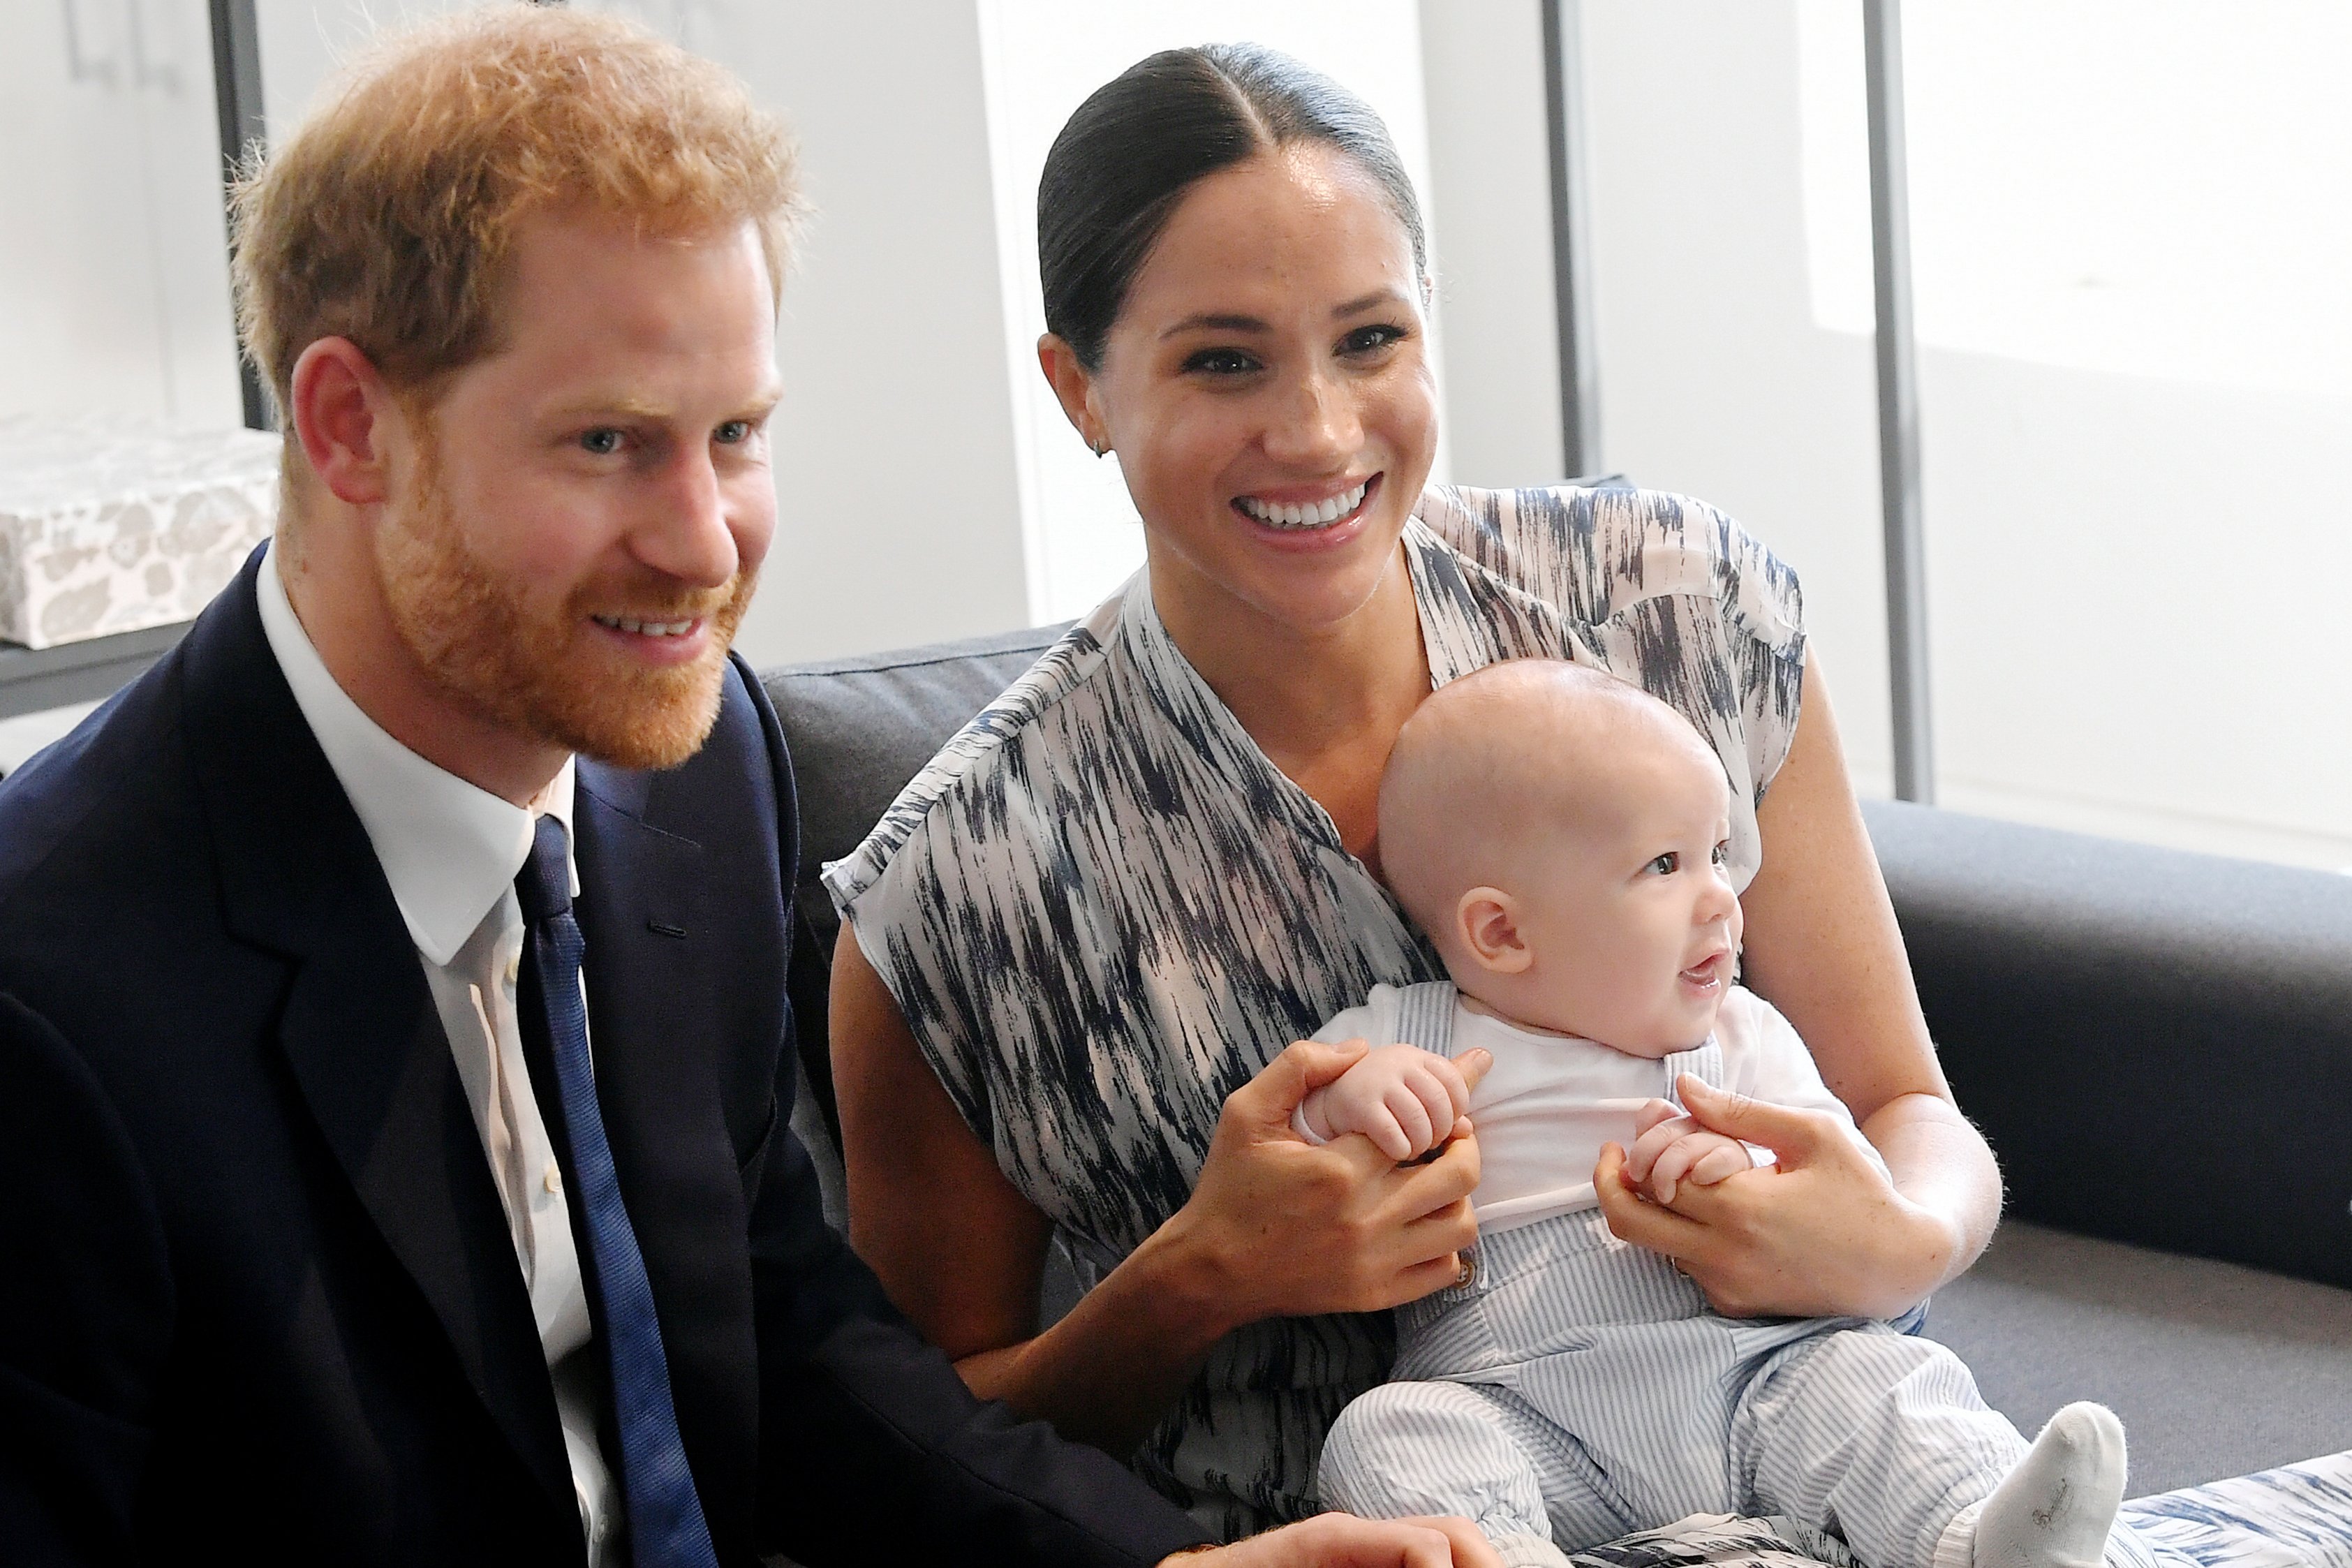 Prince Harry, Duke of Sussex, Meghan, Duchess of Sussex, and their baby son, Archie Mountbatten-Windsor meet Archbishop Desmond Tutu and his daughter Thandeka Tutu-Gxashe at the Desmond & Leah Tutu Legacy Foundation during their royal tour of South Africa on September 25, 2019, in Cape Town, South Africa. | Source: Getty Images